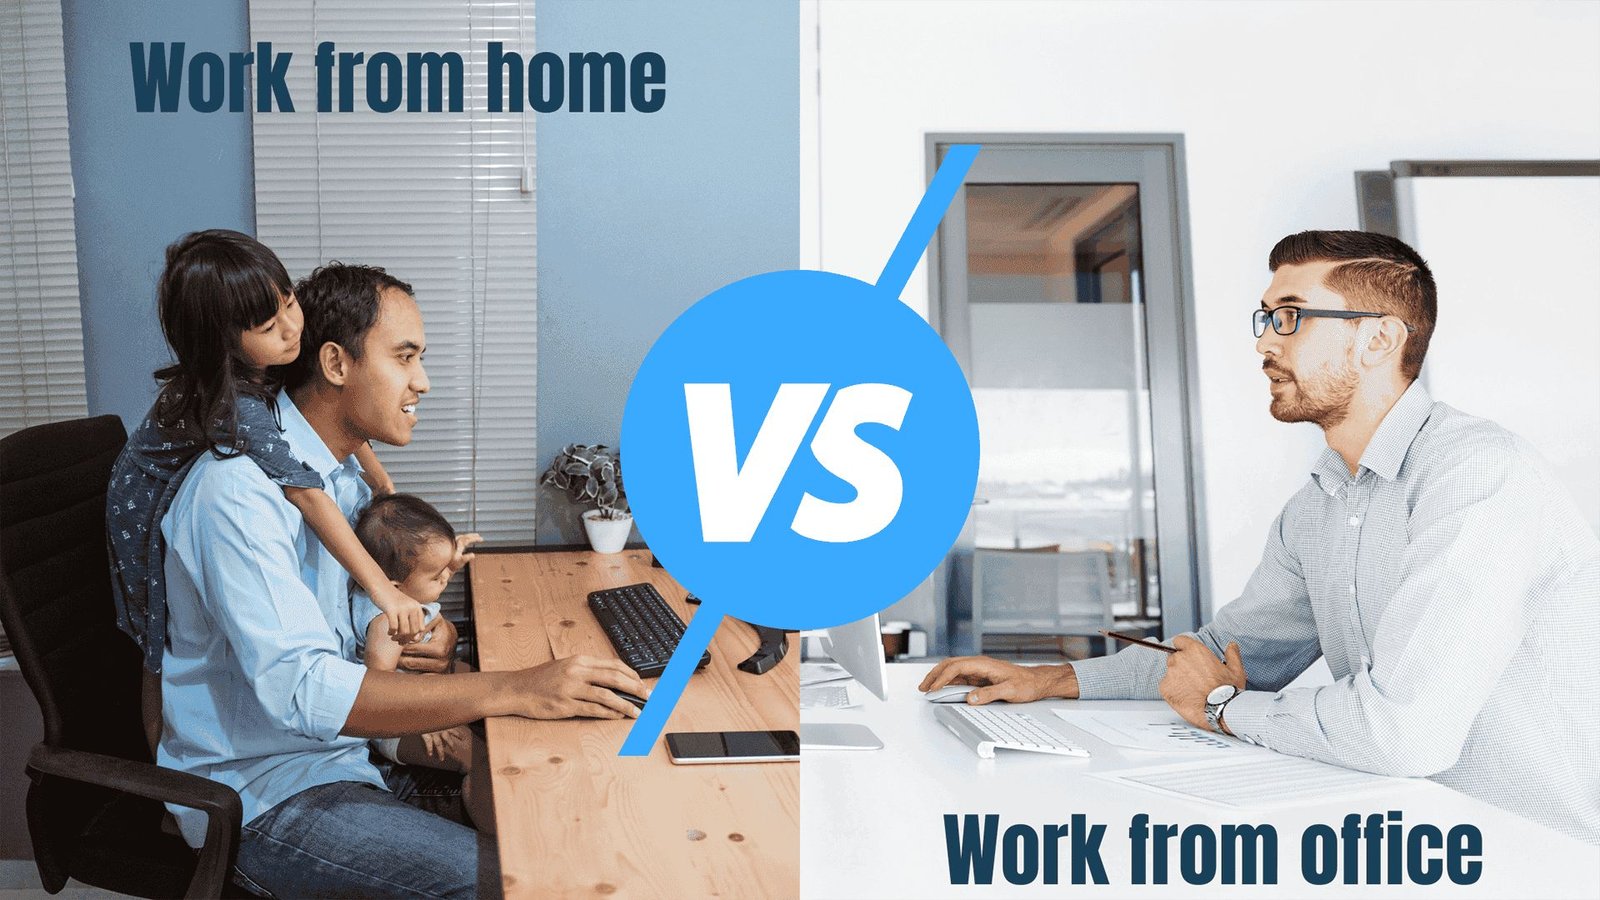 A Picture Crooped in the Middle with a Man and Two Kids Working From Home and another picture of a Man Working in a Traditional Office